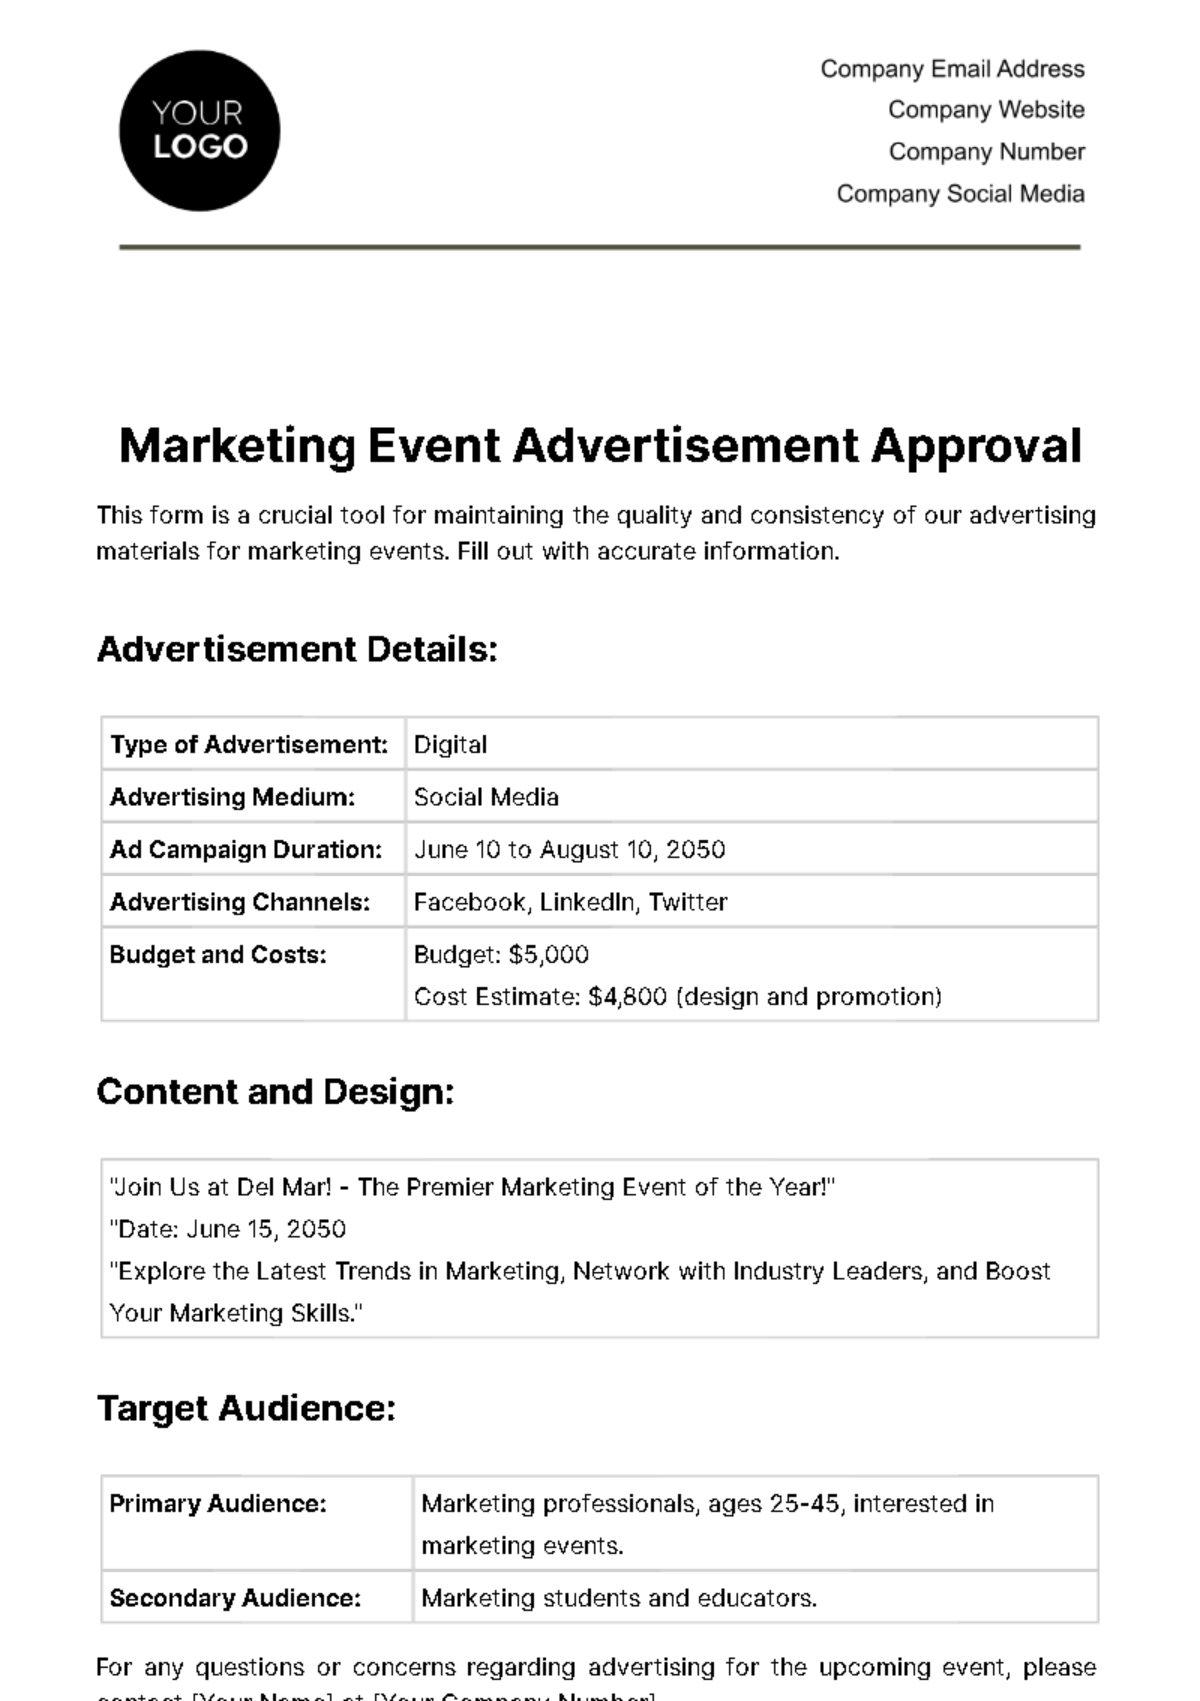 Free Marketing Event Advertisement Approval Template